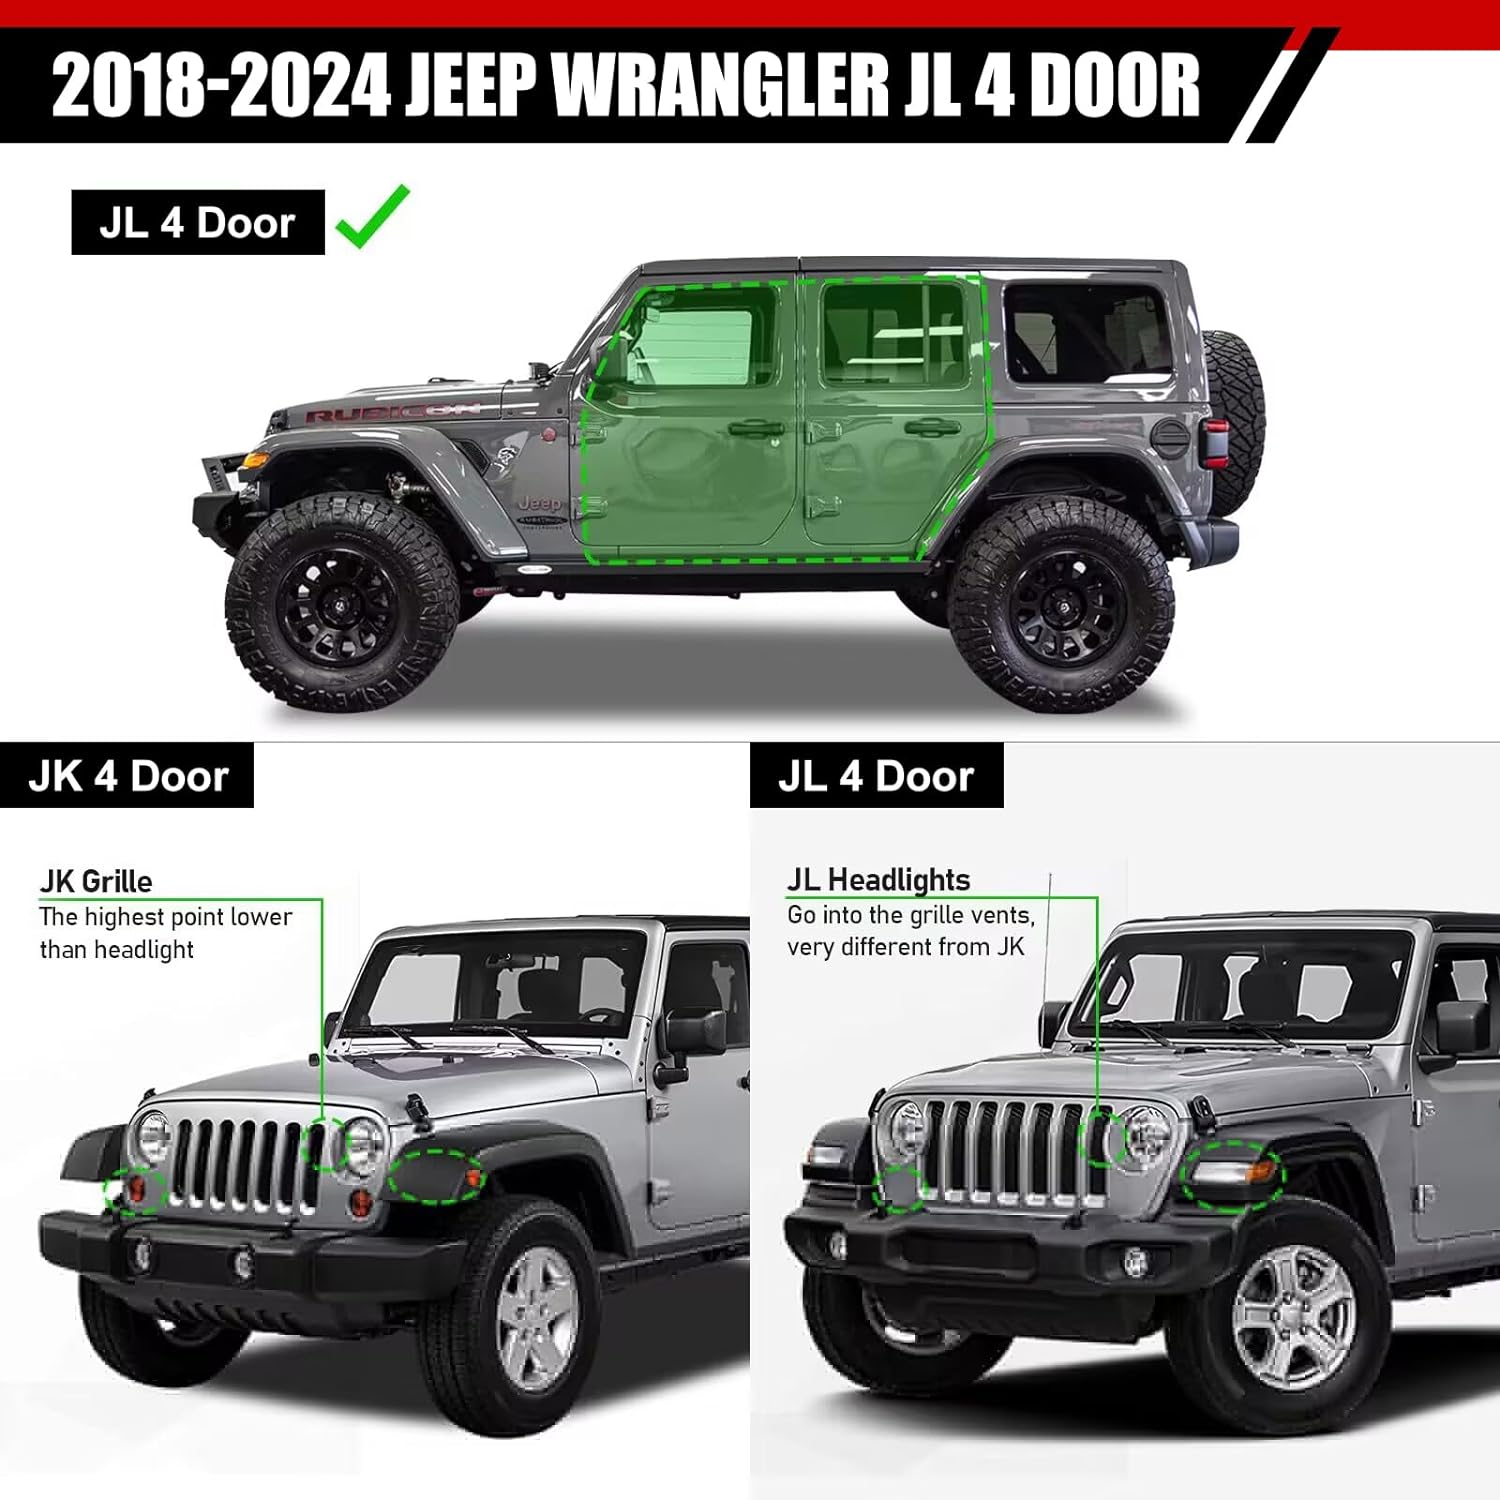 Stainless Steel Running Boards for 2018-2024 Jeep Wrangler JL 4 Doors D6 Style. - COMNOVA AUTOPART